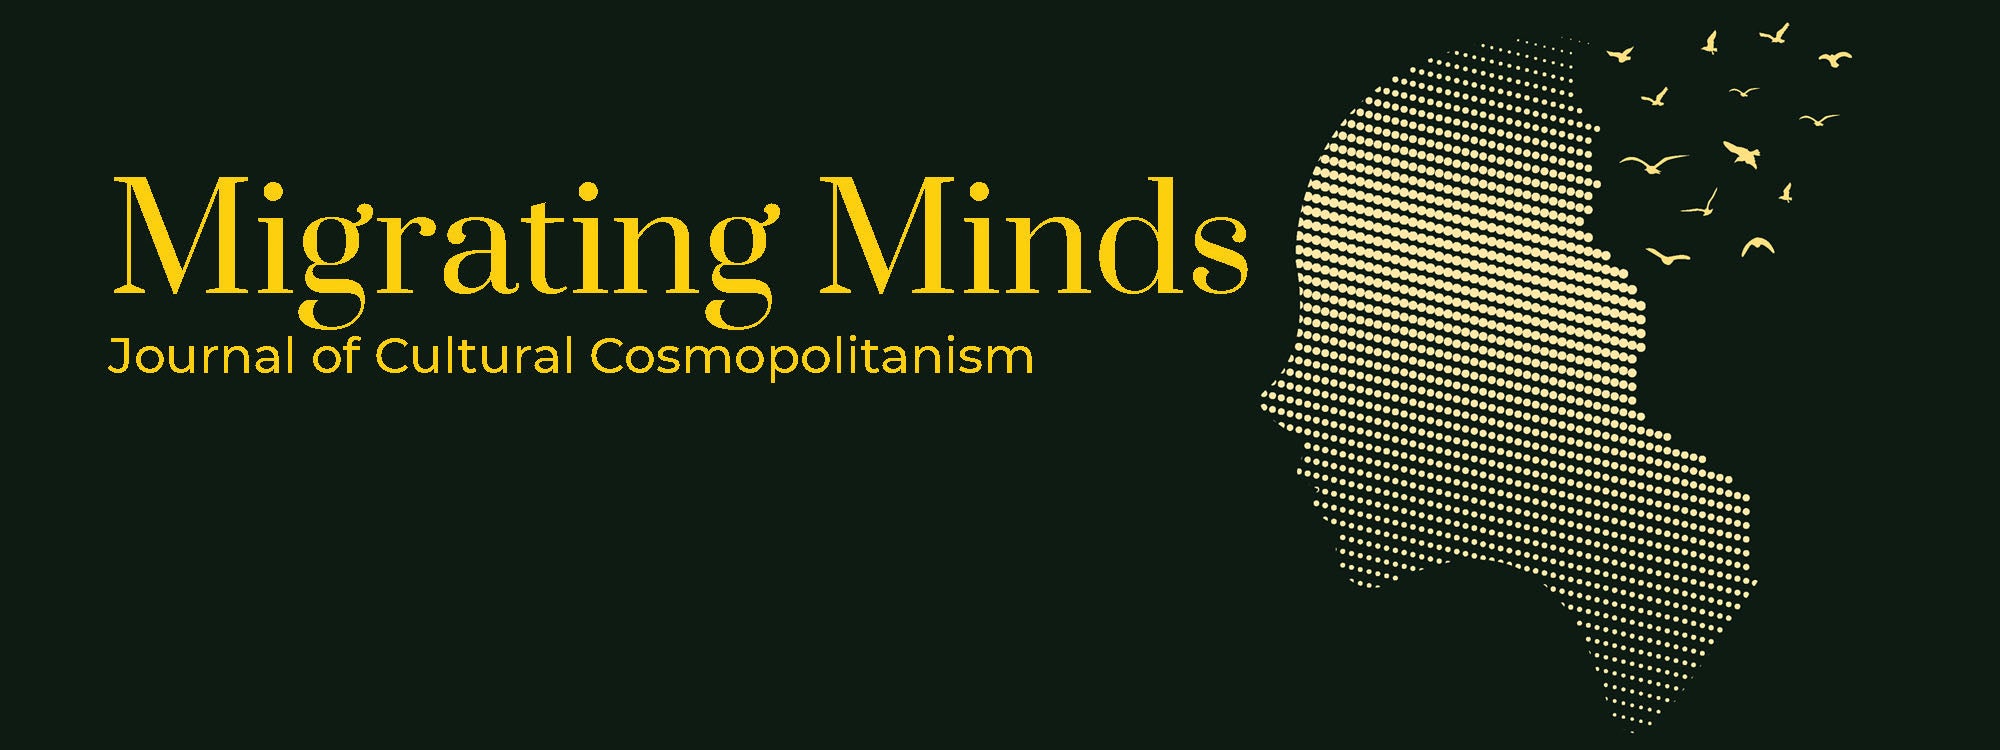 Migrating Minds Journal of Cultural Cosmopolitanism logo showing a face in profile using a halftone pattern with a flock of birds taking flight from the back of the head